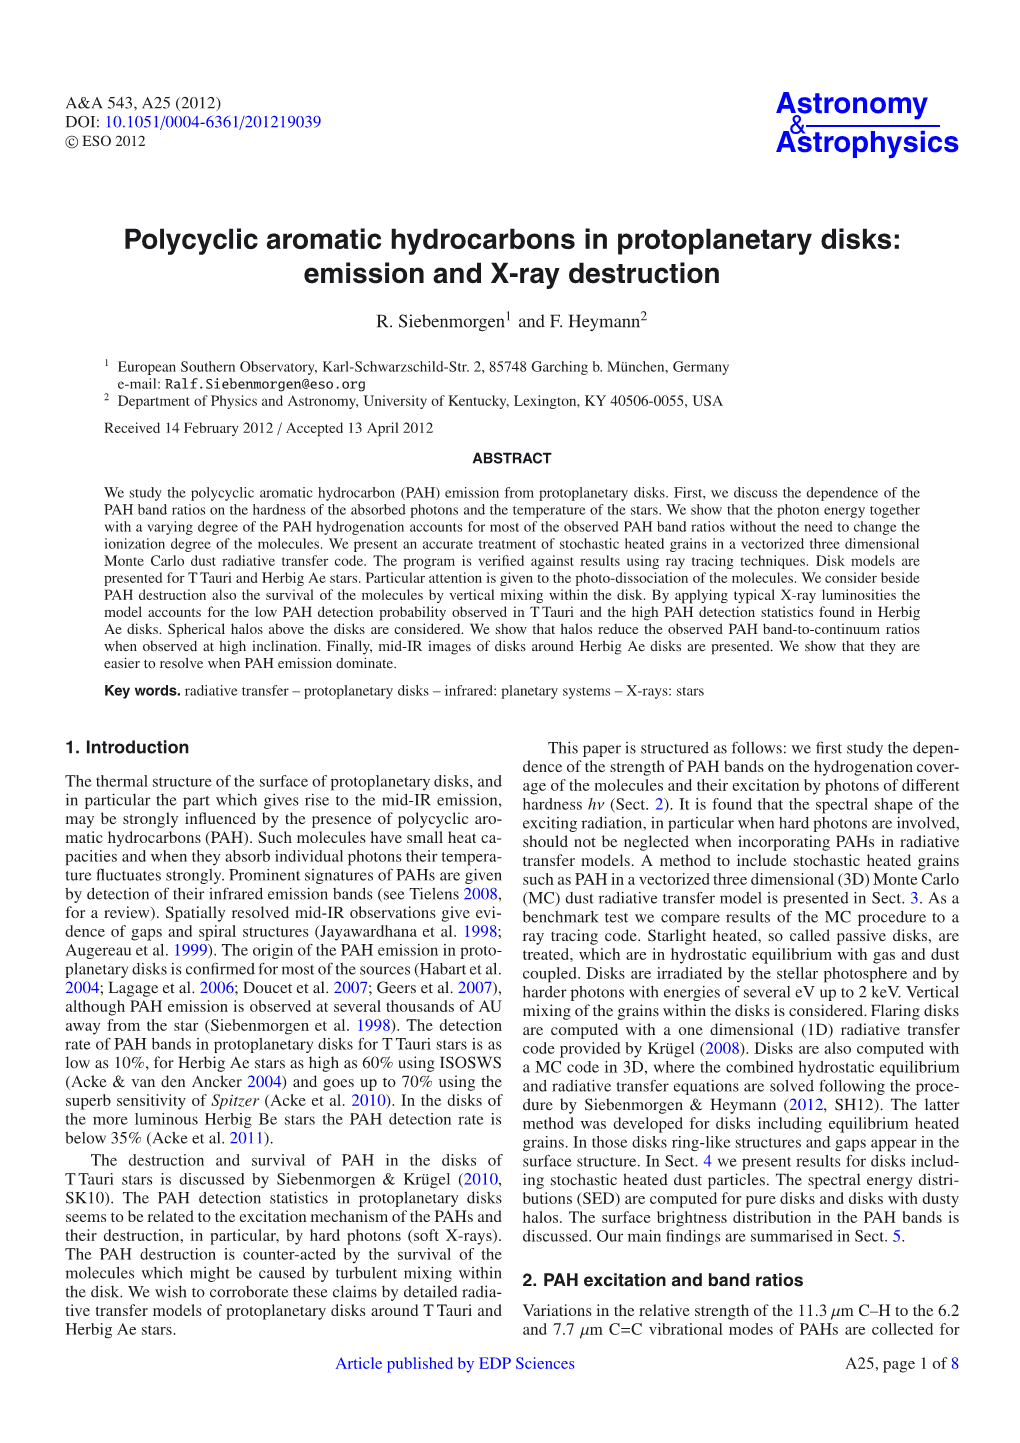 Polycyclic Aromatic Hydrocarbons in Protoplanetary Disks: Emission and X-Ray Destruction